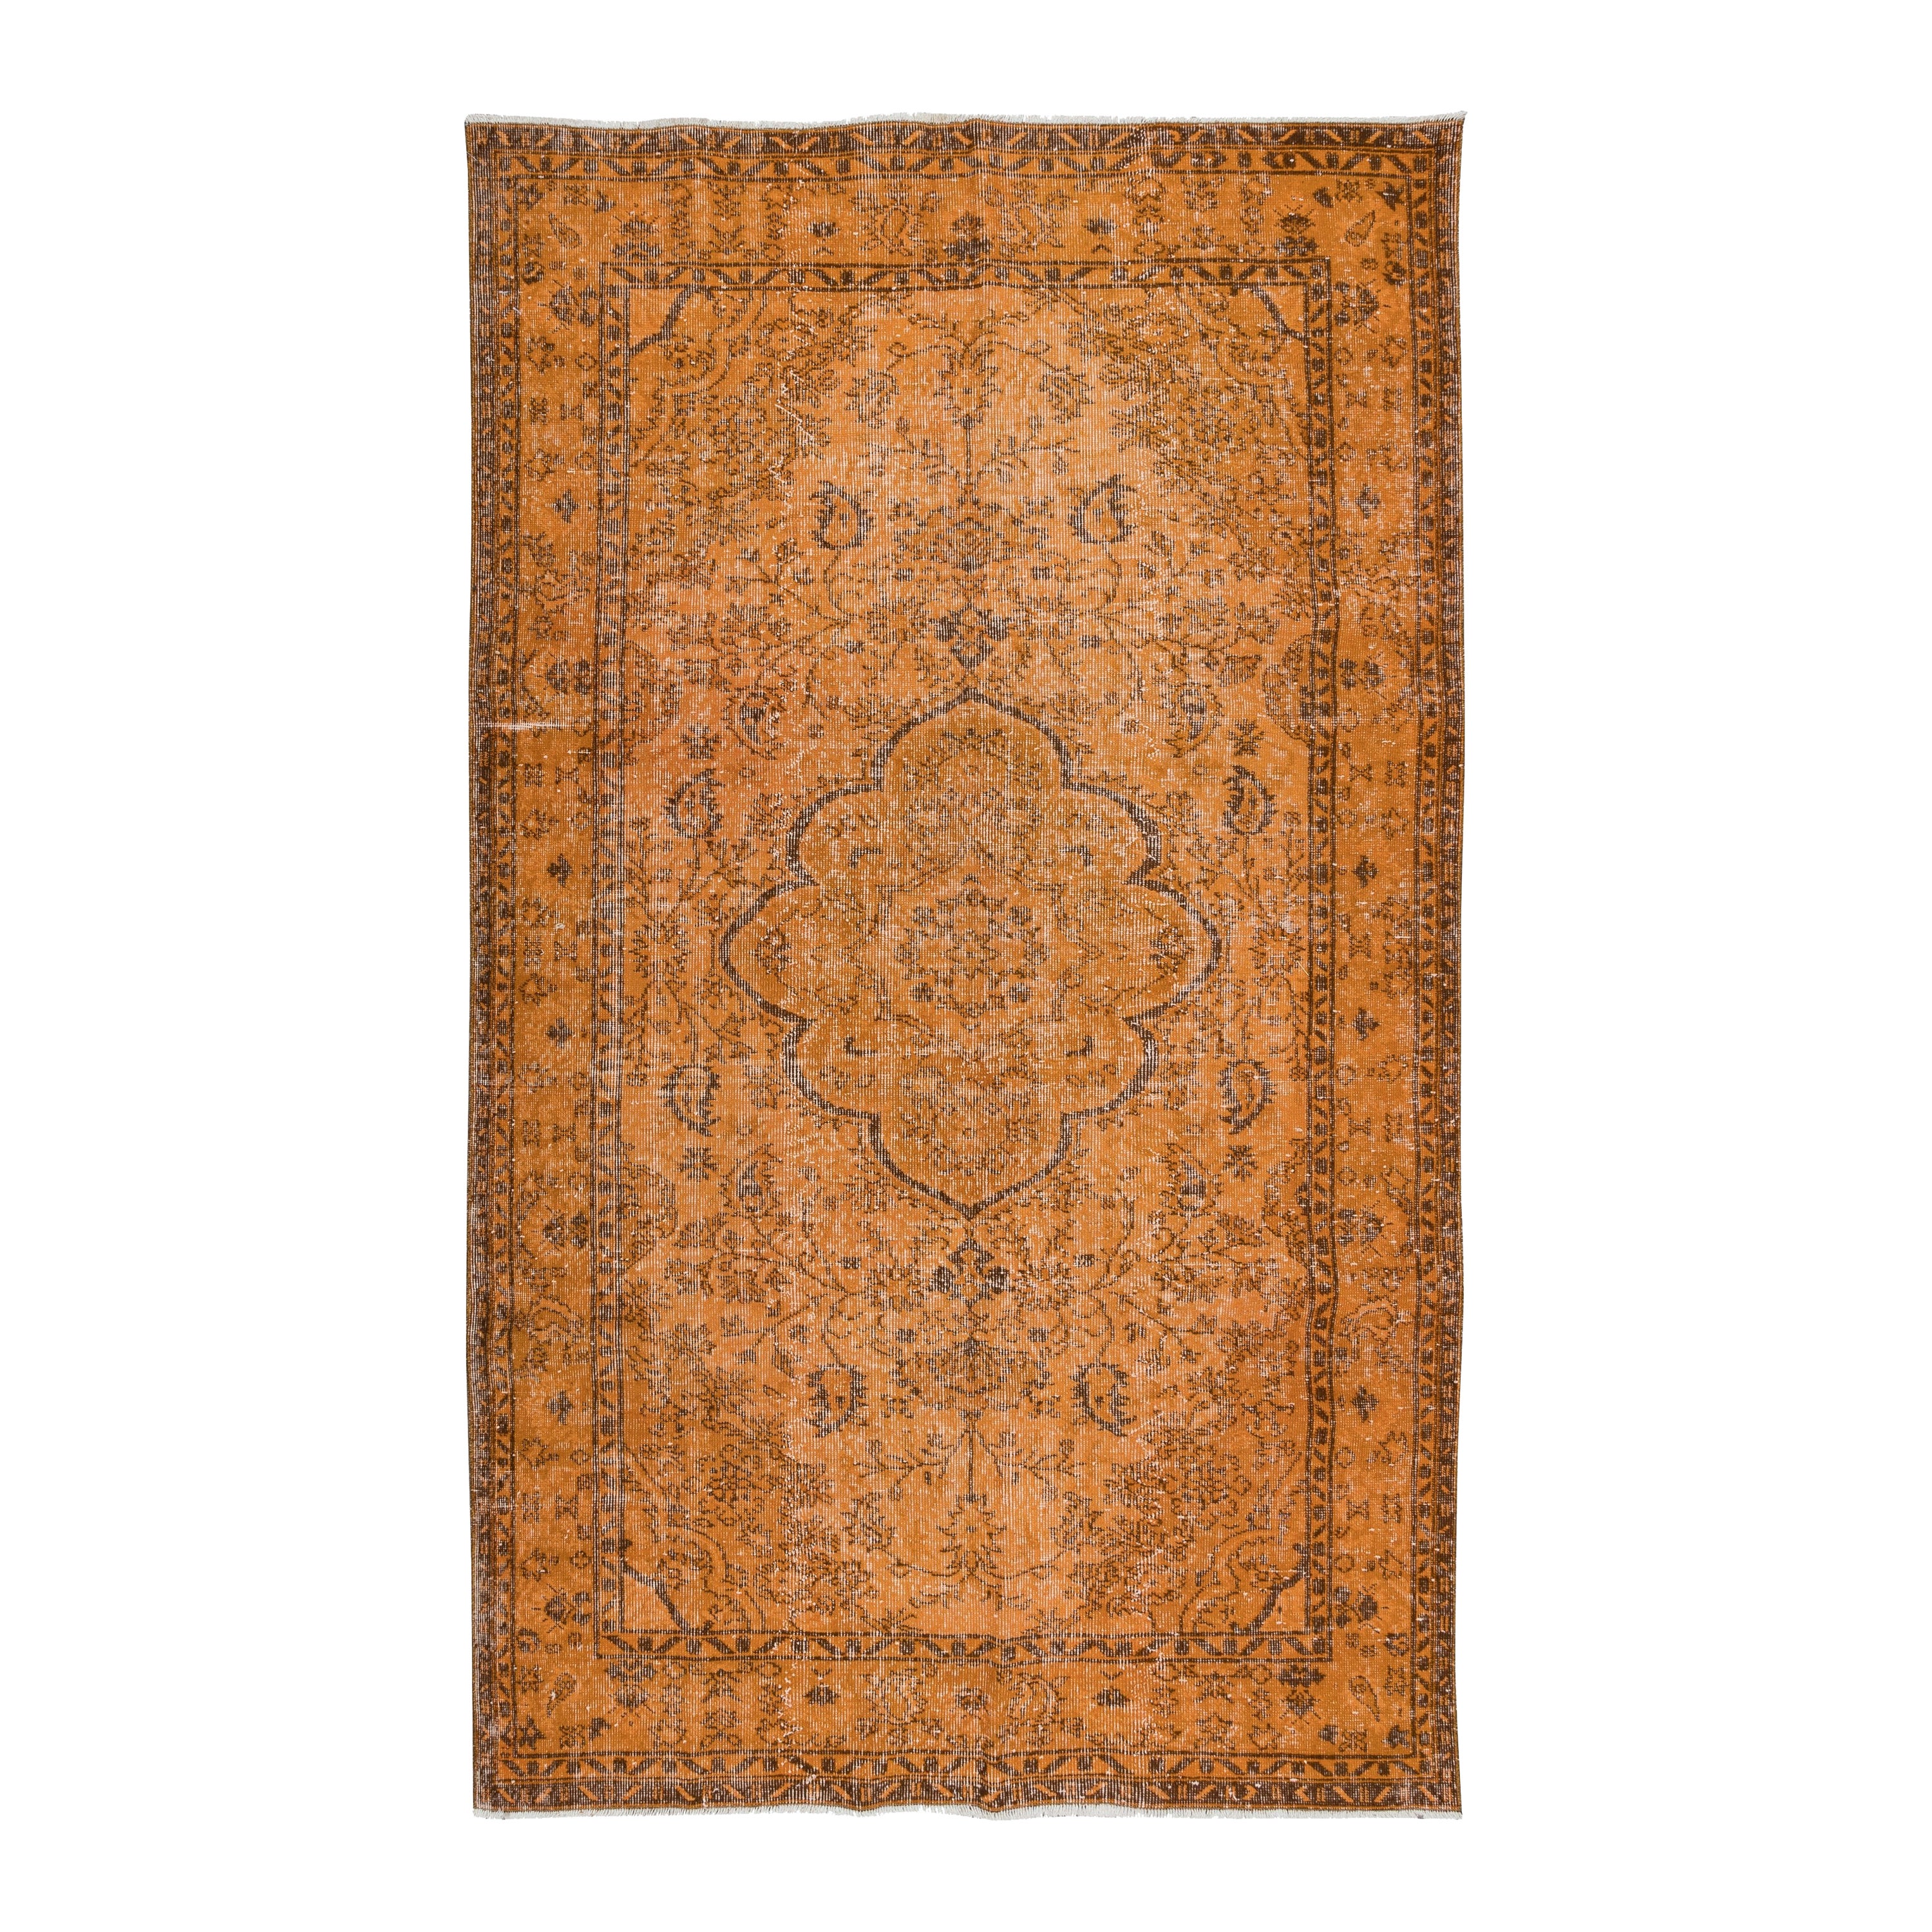 5.2x8.8 Ft Vintage Orange Area Rug, Handwoven and Handknotted in Turkey For Sale